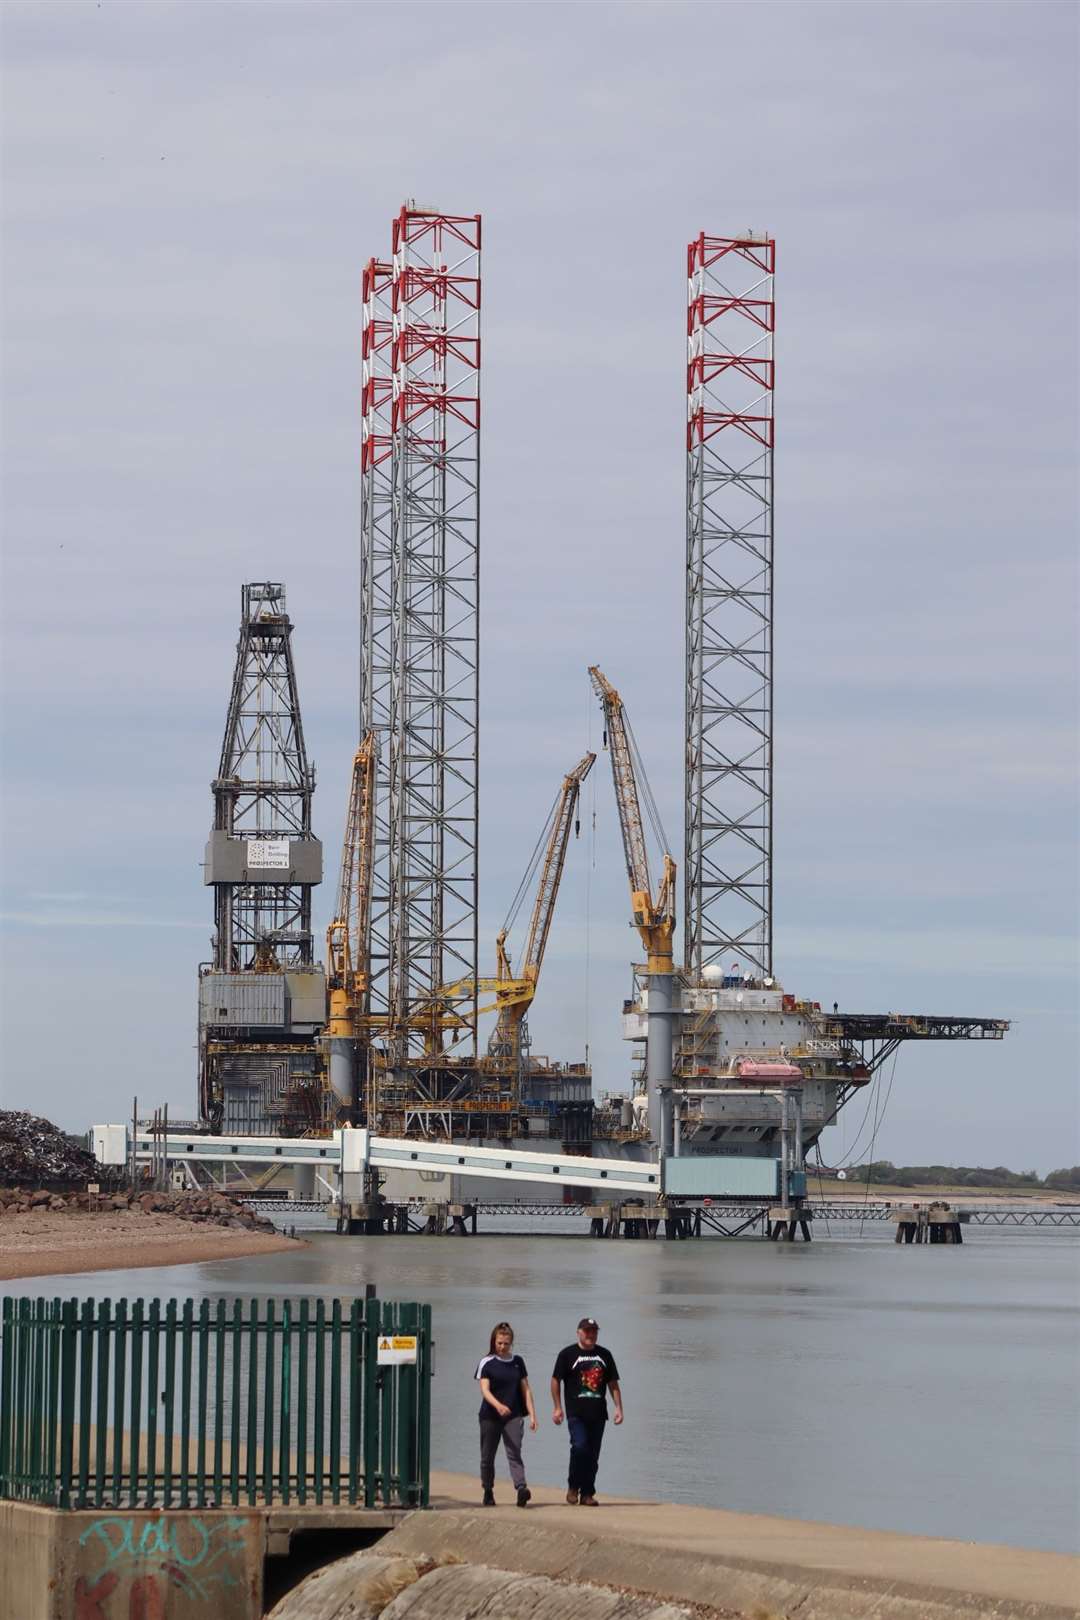 Prospector 1 jack-up rig which was towed into Sheerness docks on Saturday. Picture: John Nurden